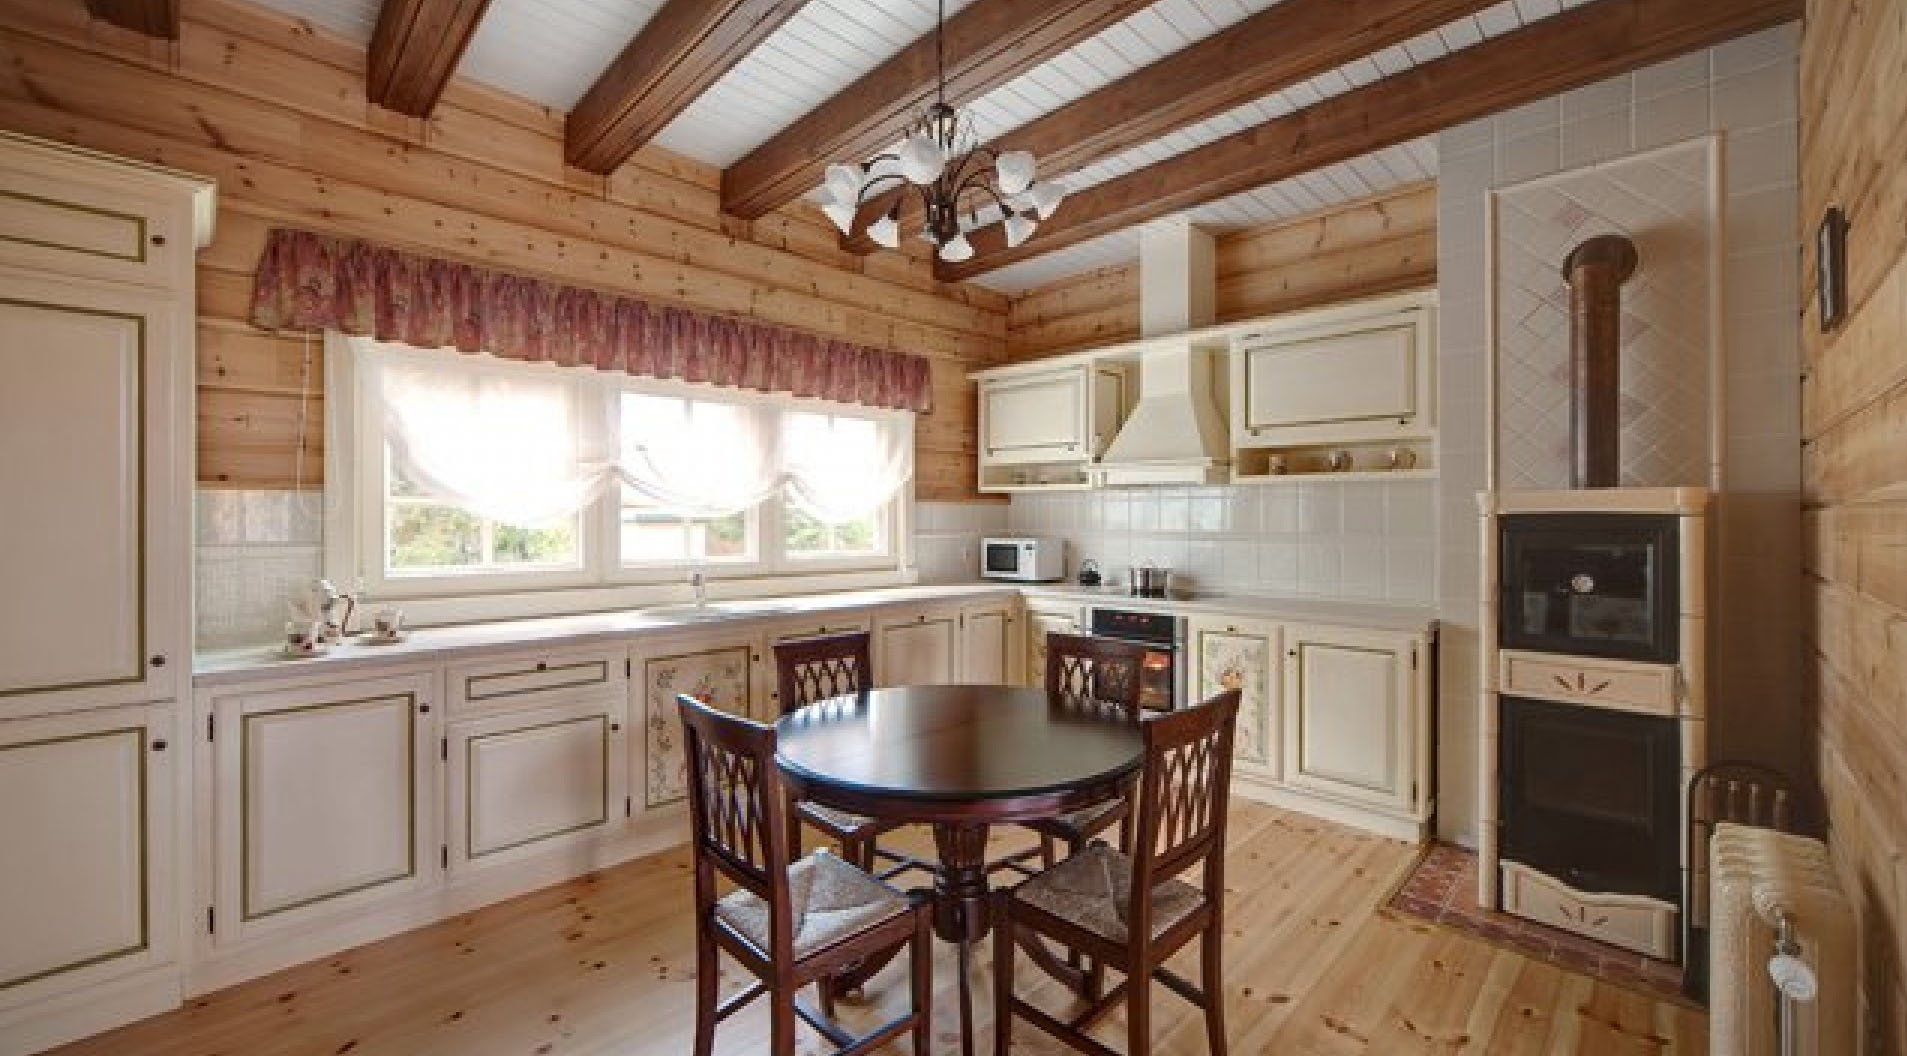 variant of a beautiful style of kitchen in a wooden house